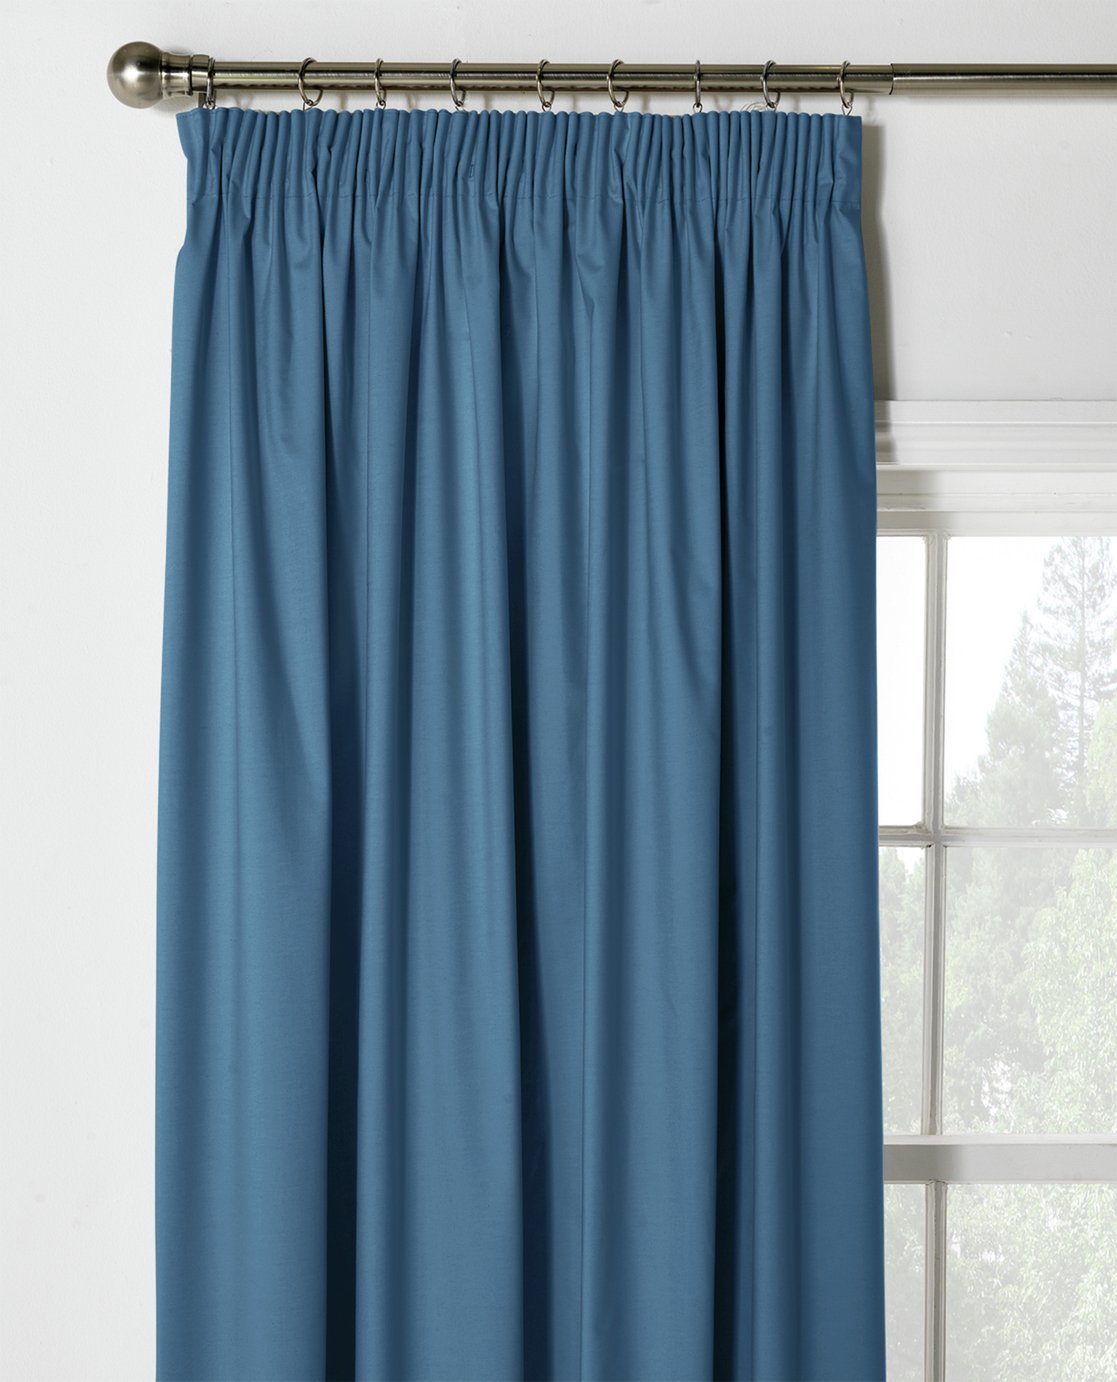 ColourMatch Thermal Blackout Curtains - 117x137cm - Navy